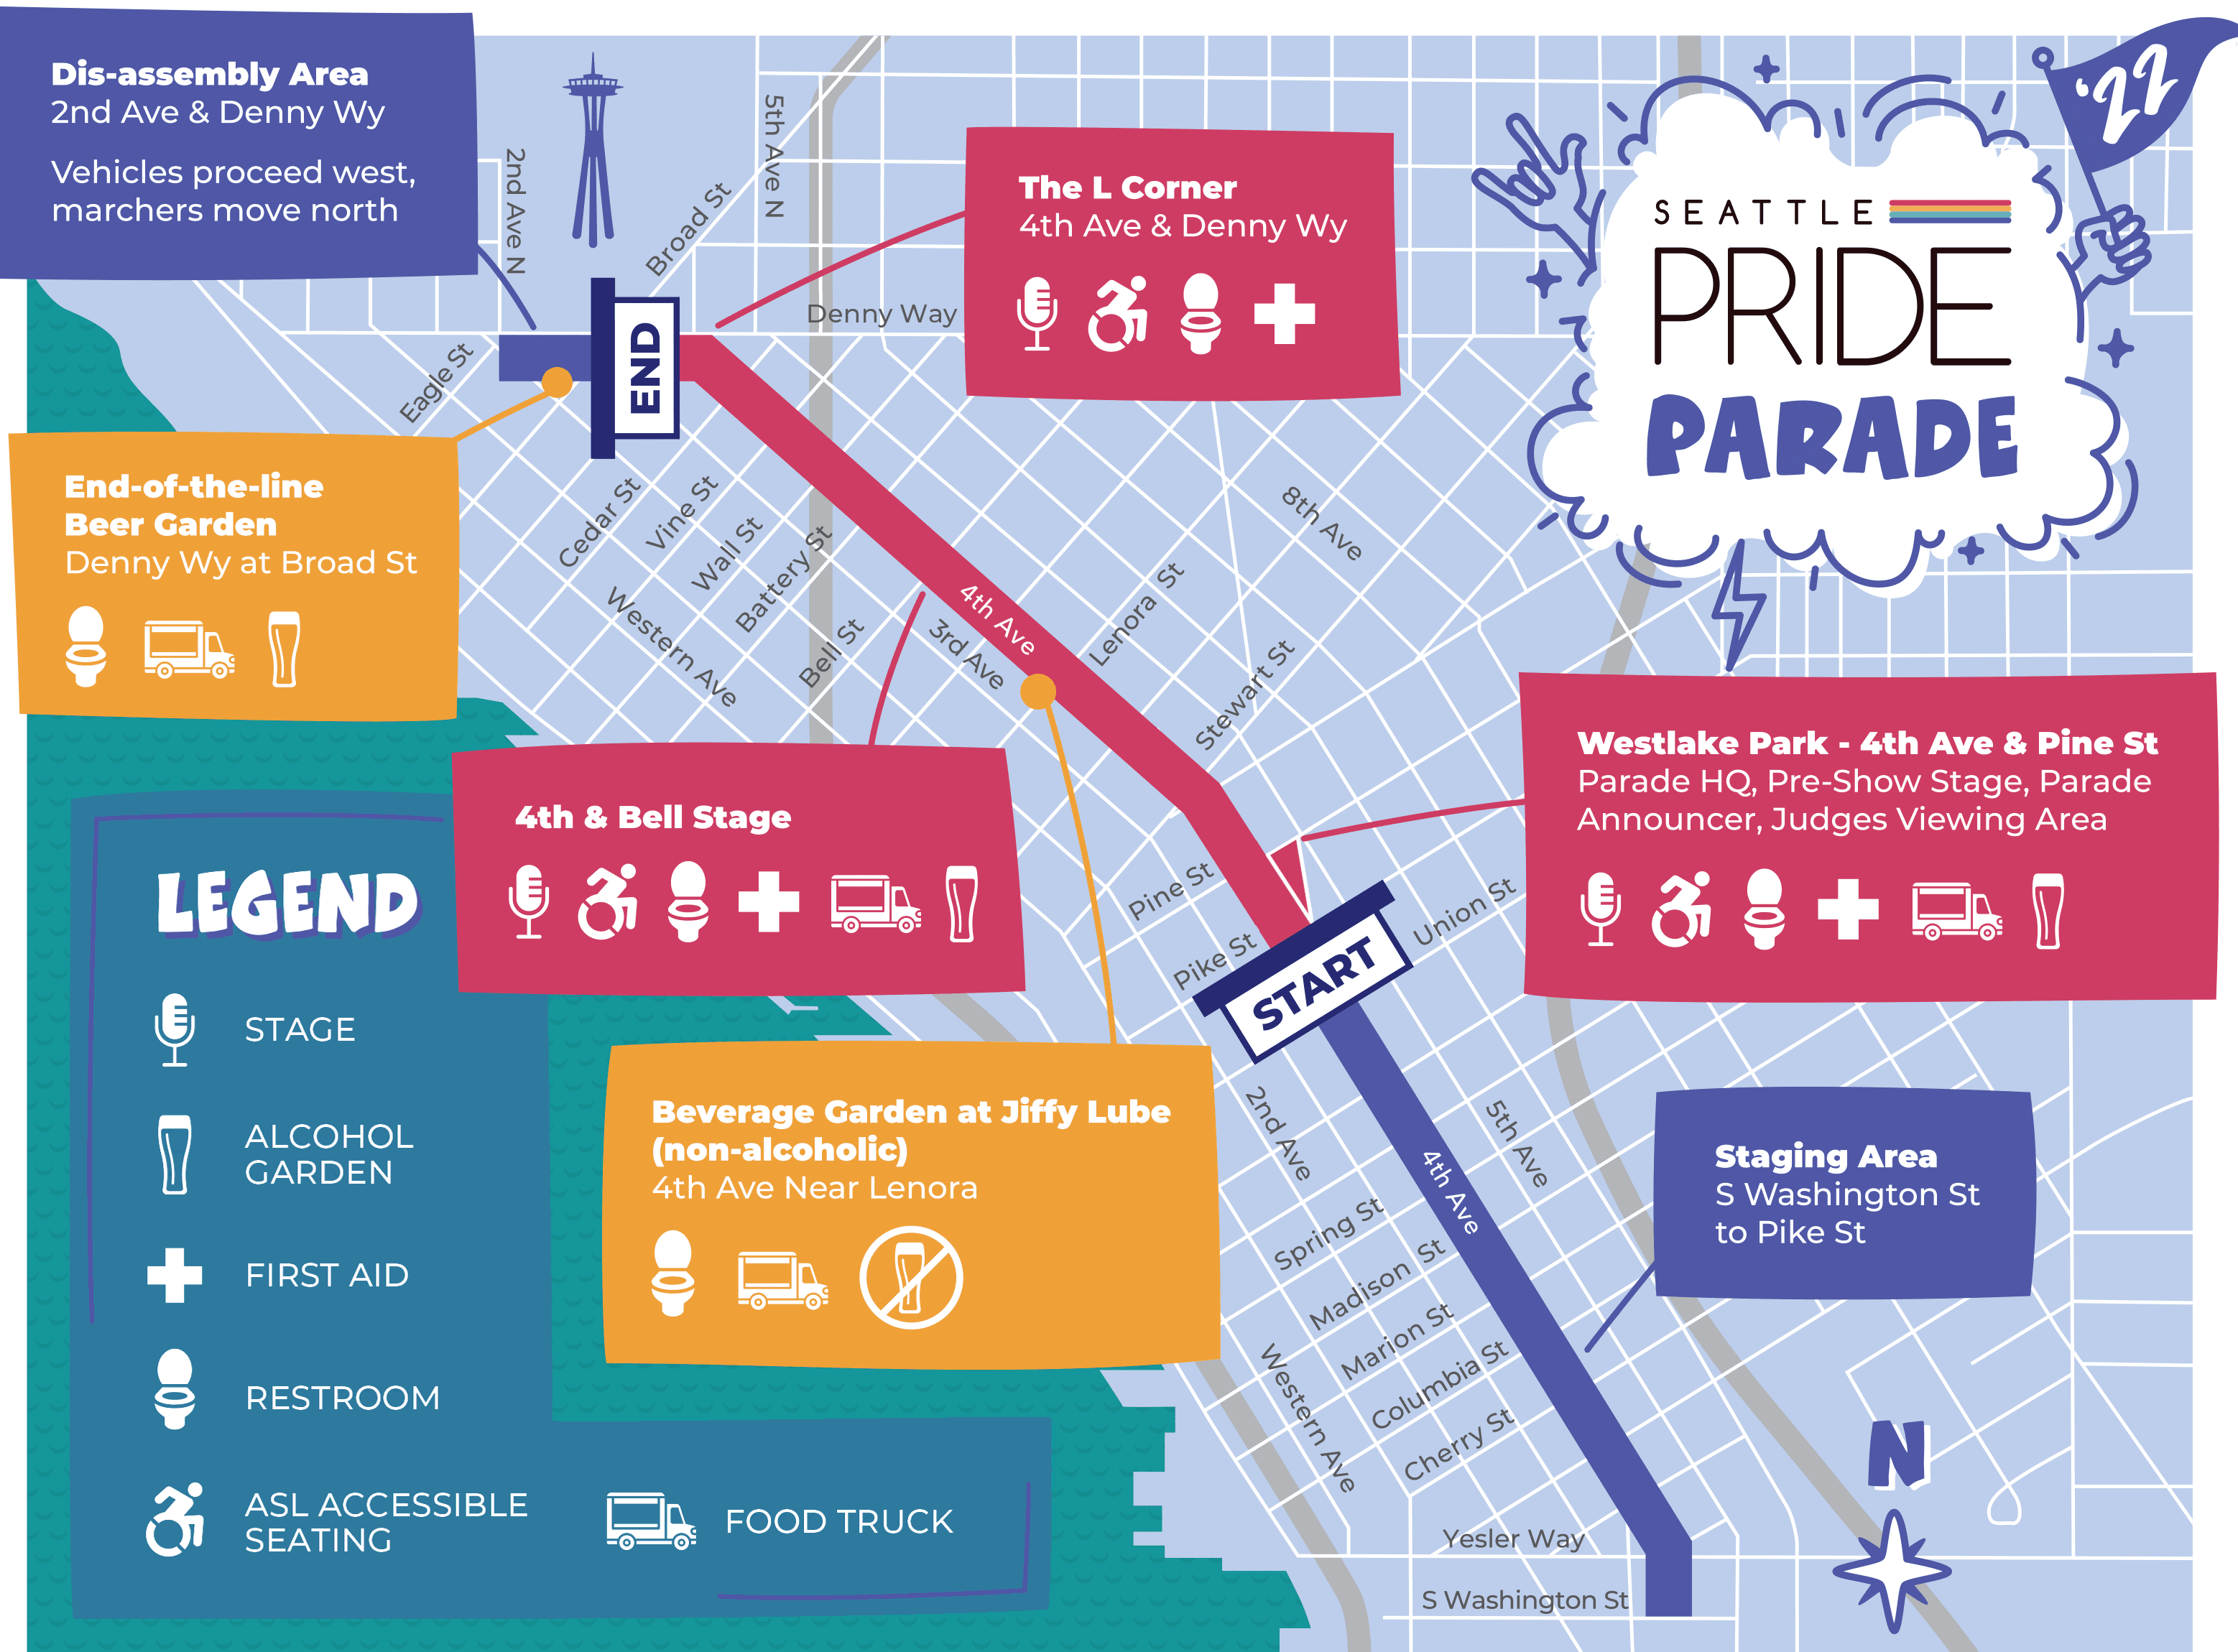 Map of the planned route for the Seattle Pride Parade, on Sunday, June 26, 2022. The map shows downtown Seattle and surrounding areas and shows where the parade will travel along 4th Ave.